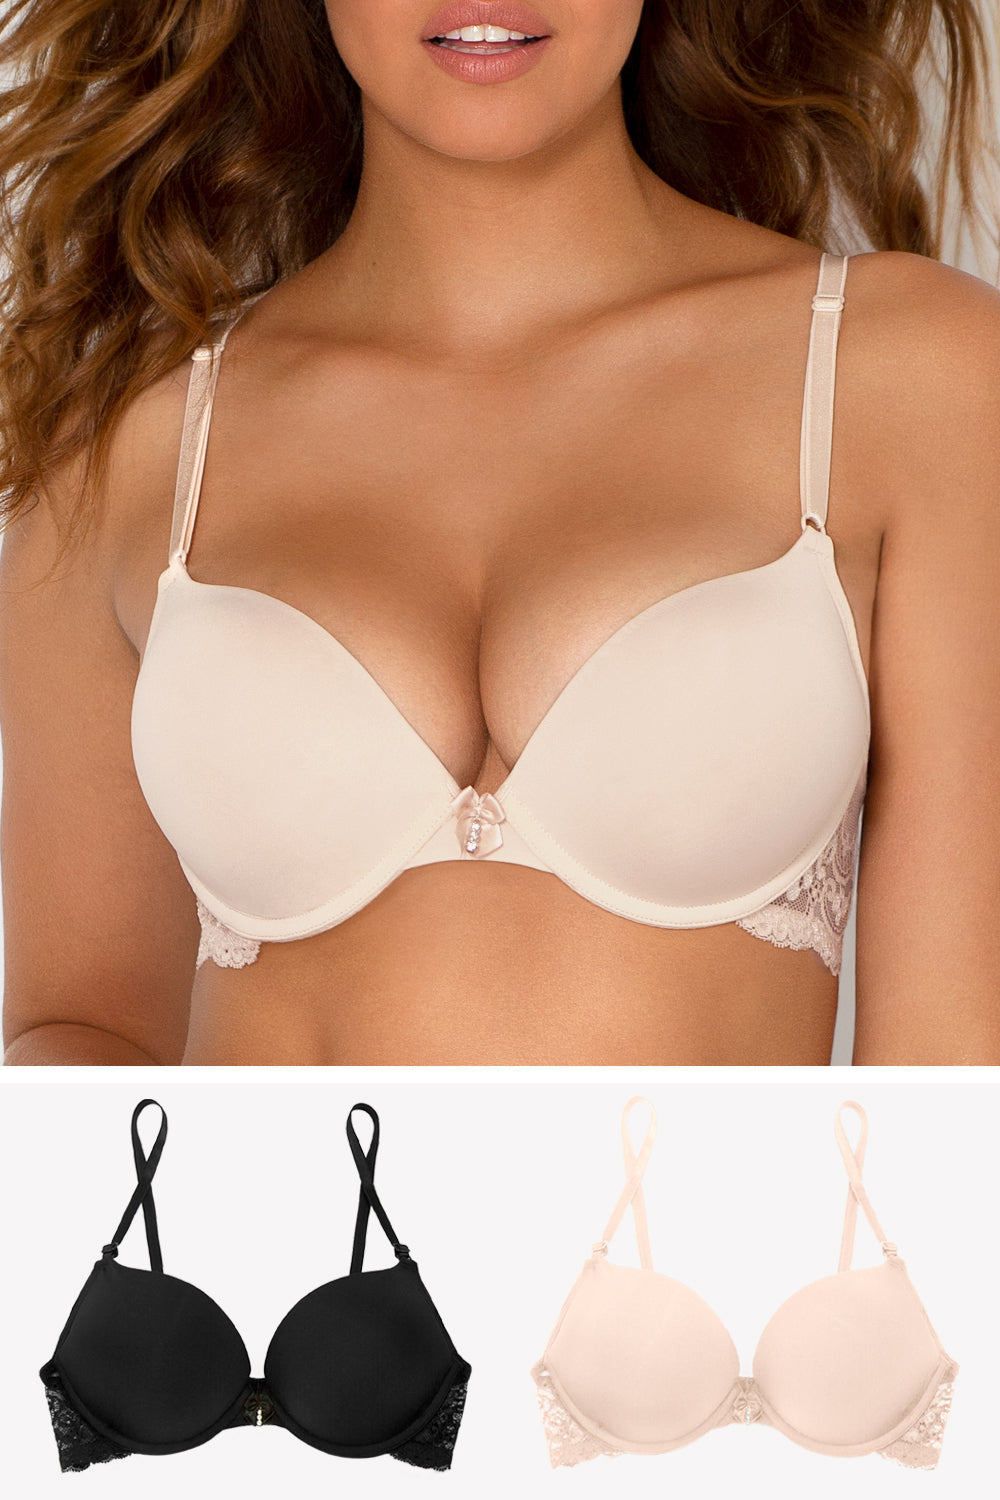 Add 2 Cup Sizes Push-Up Bra 2 Pack  In The Buff/Black Hue W Lace Wing –  Smart & Sexy